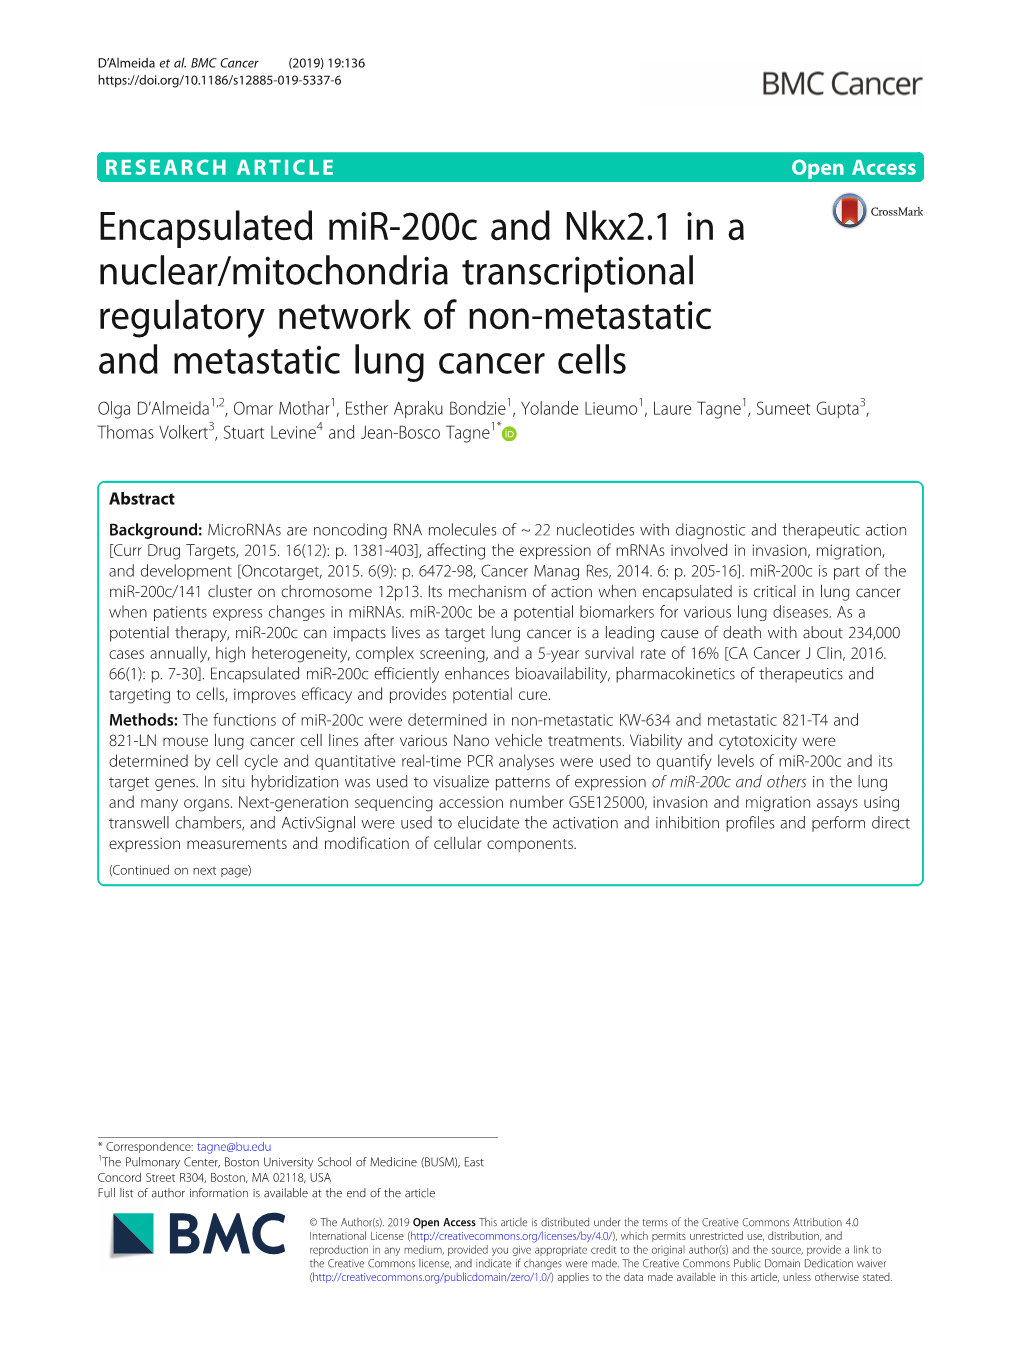 Encapsulated Mir-200C and Nkx2.1 in a Nuclear/Mitochondria